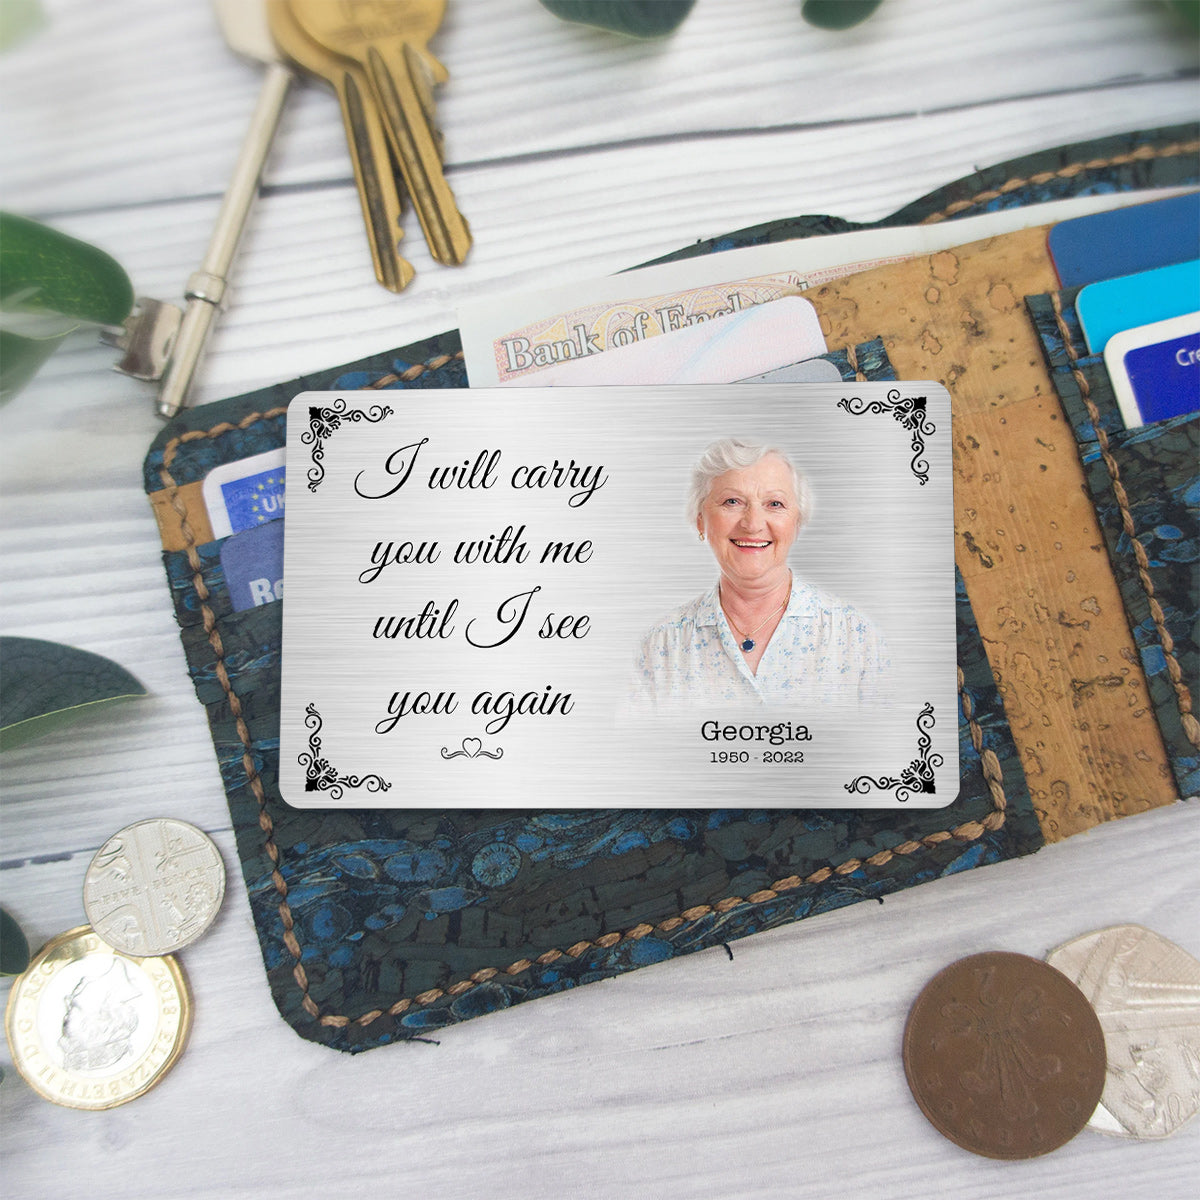 I Will Carry You With Me - Memorial gift for loss of - Personalized Wallet Insert Card